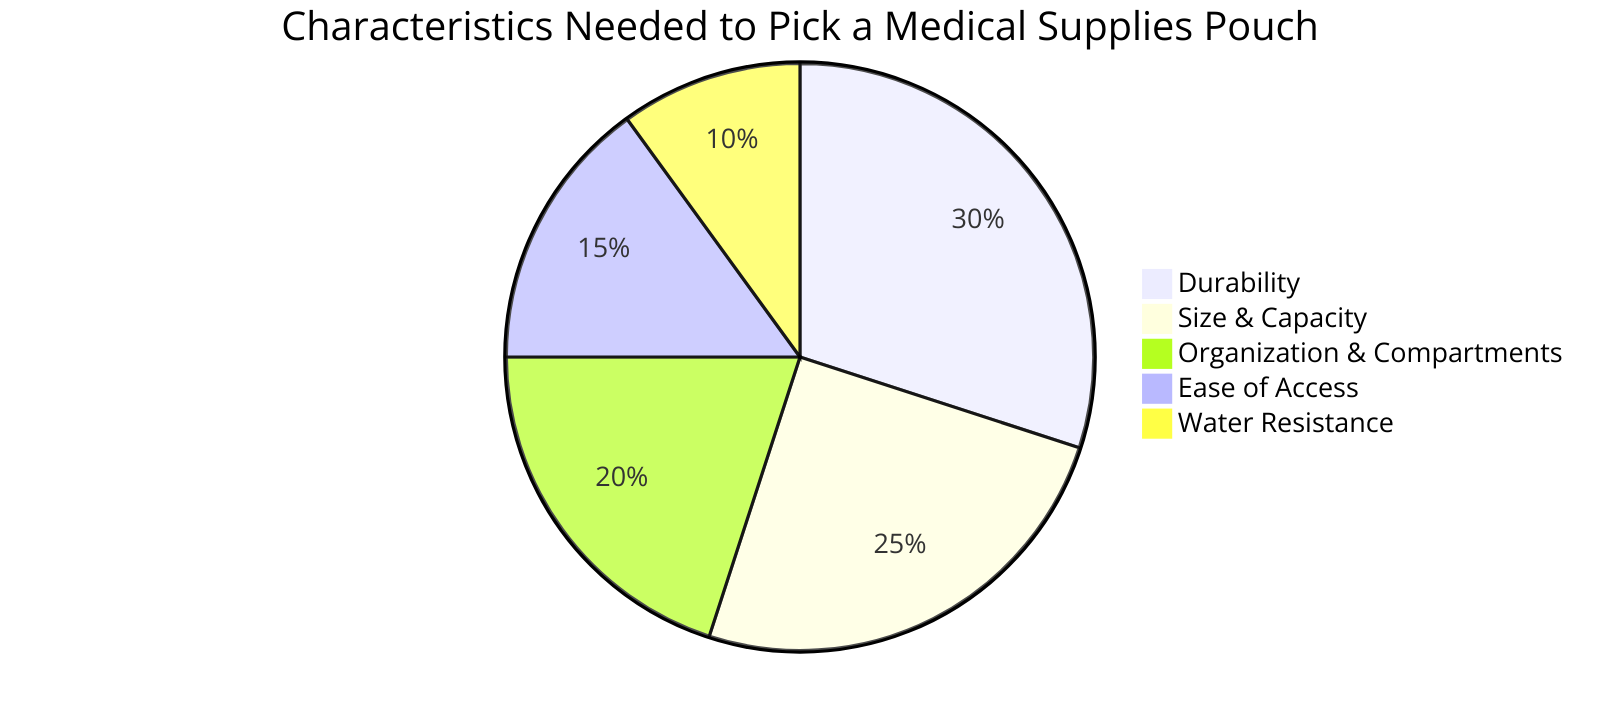  the characteristics needed to pick a medical supplies pouch